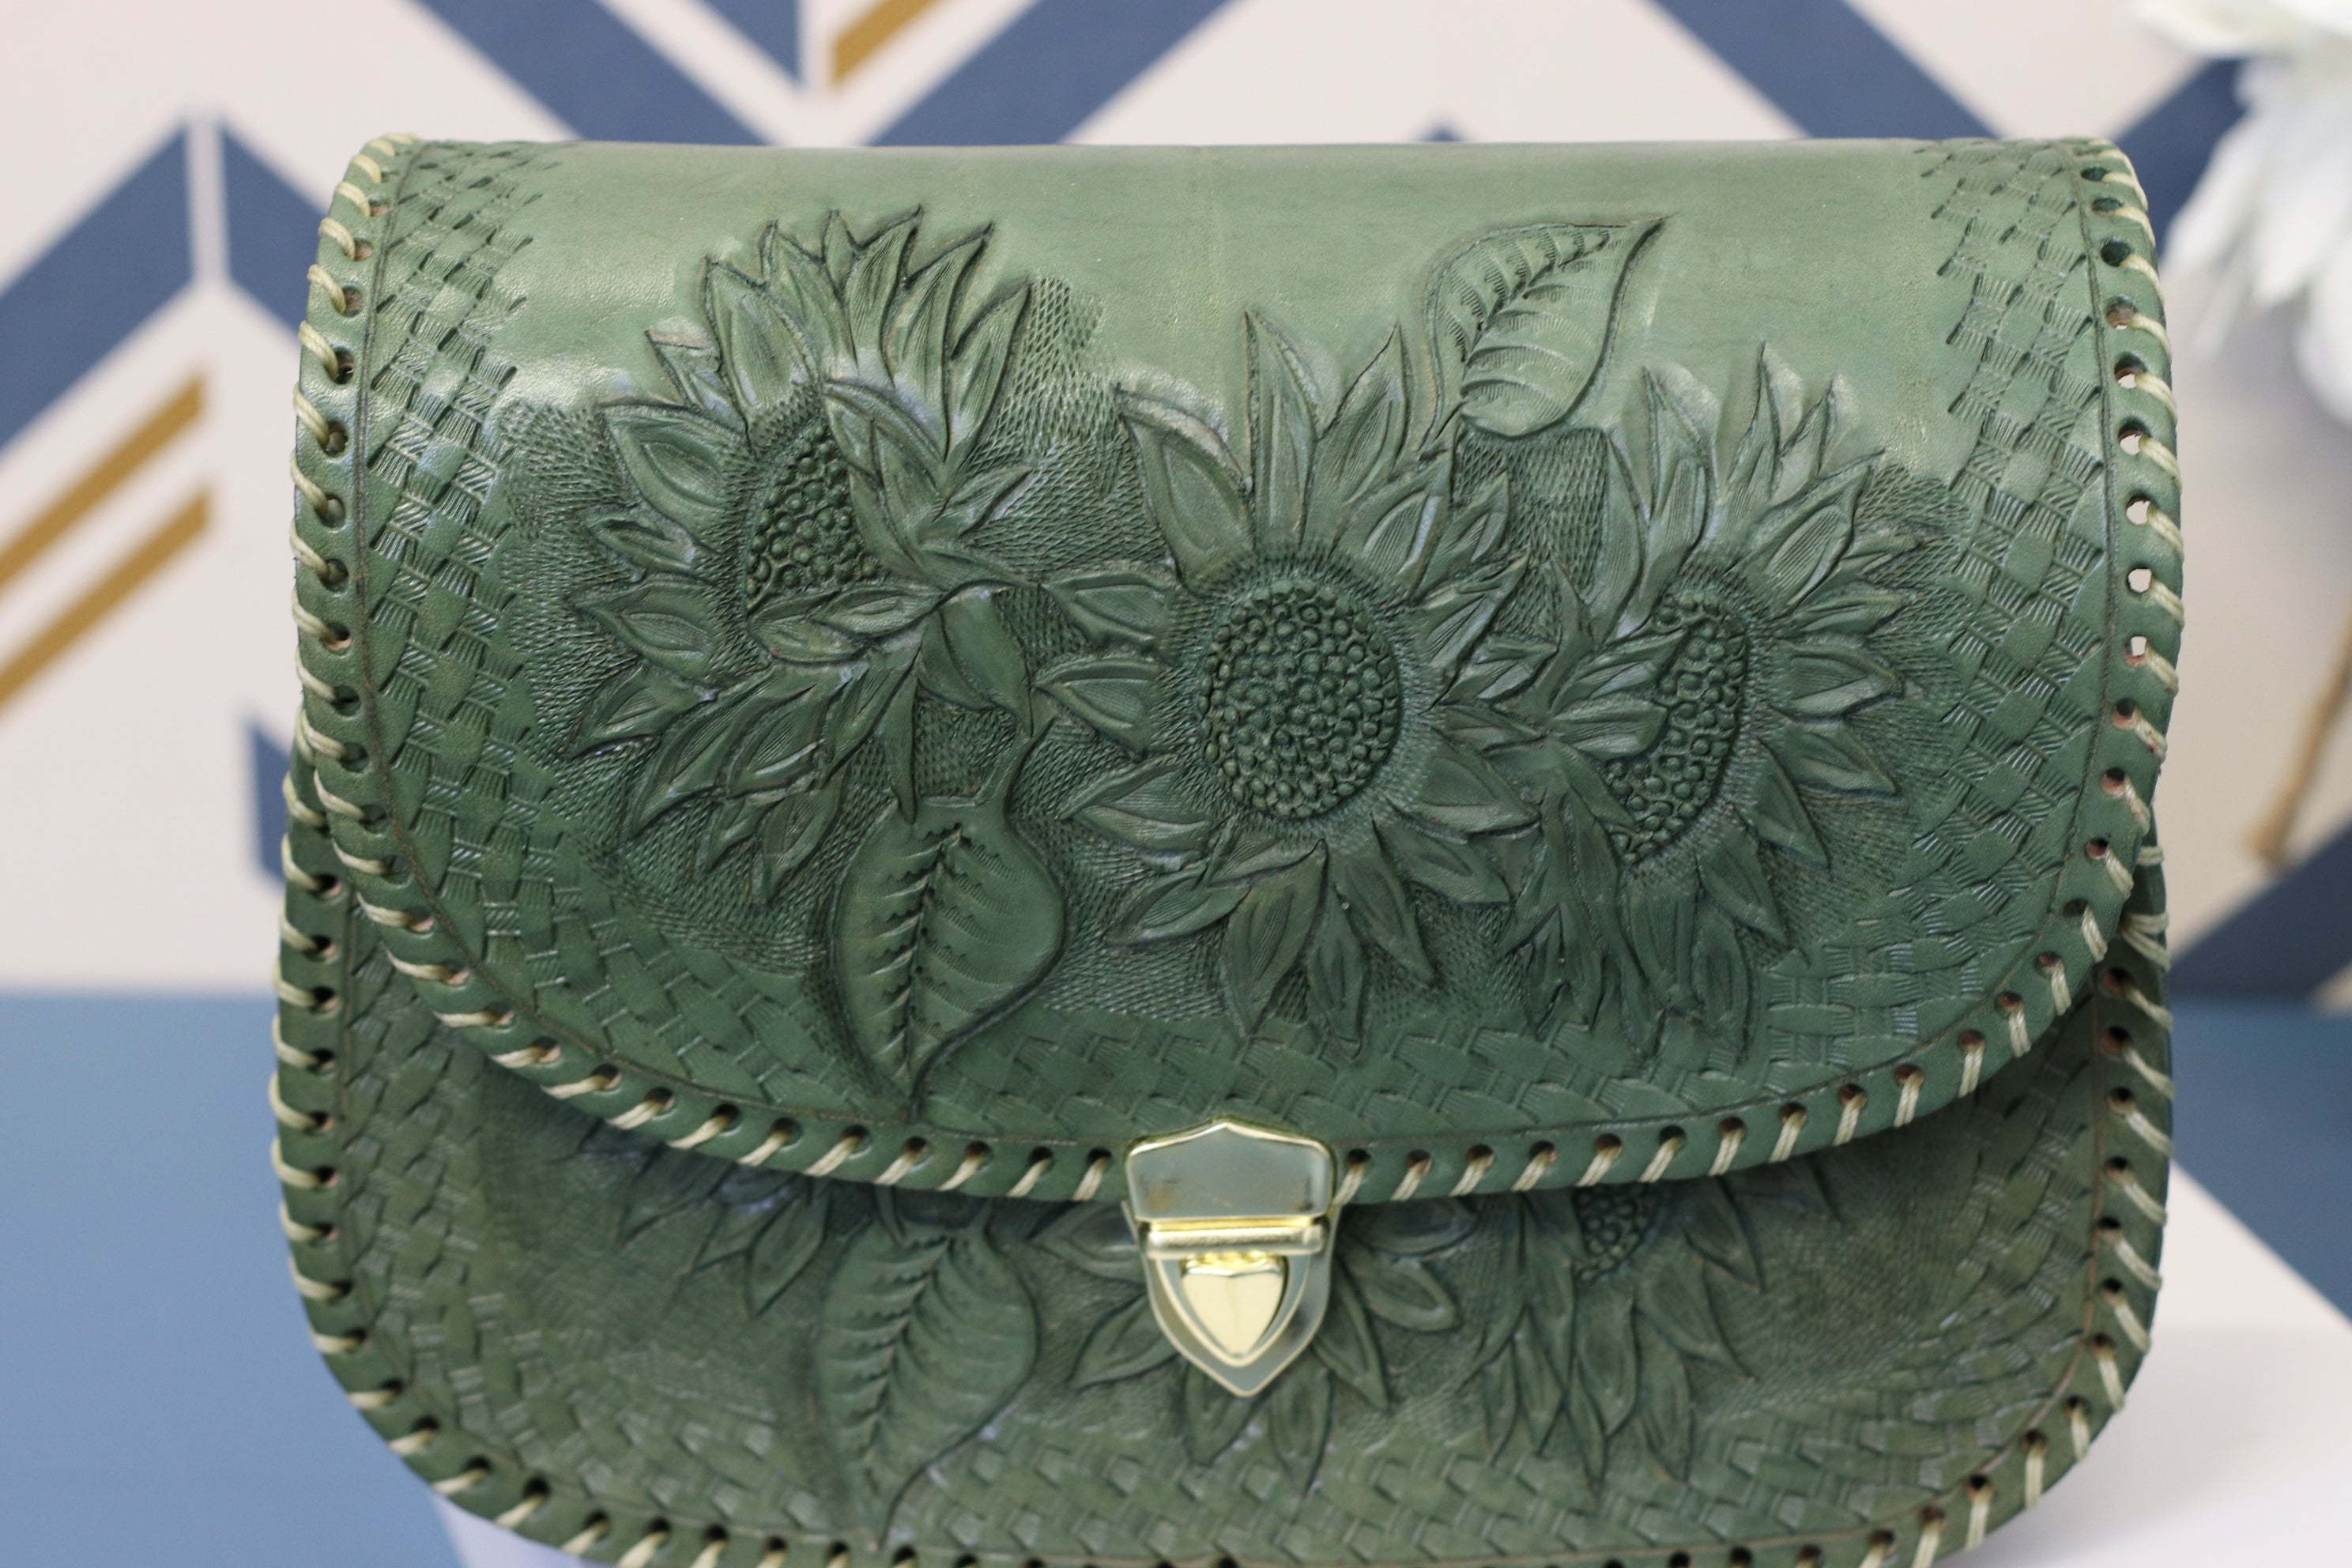 Green Detachable Strap, Adjustable Strap, hand-tooled leather with gold clasp closure. Clutch Handbag. Made by artisans in Central Mexico, shipping from the USA. Handmade. Buy now at www.felipeandgrace.com.